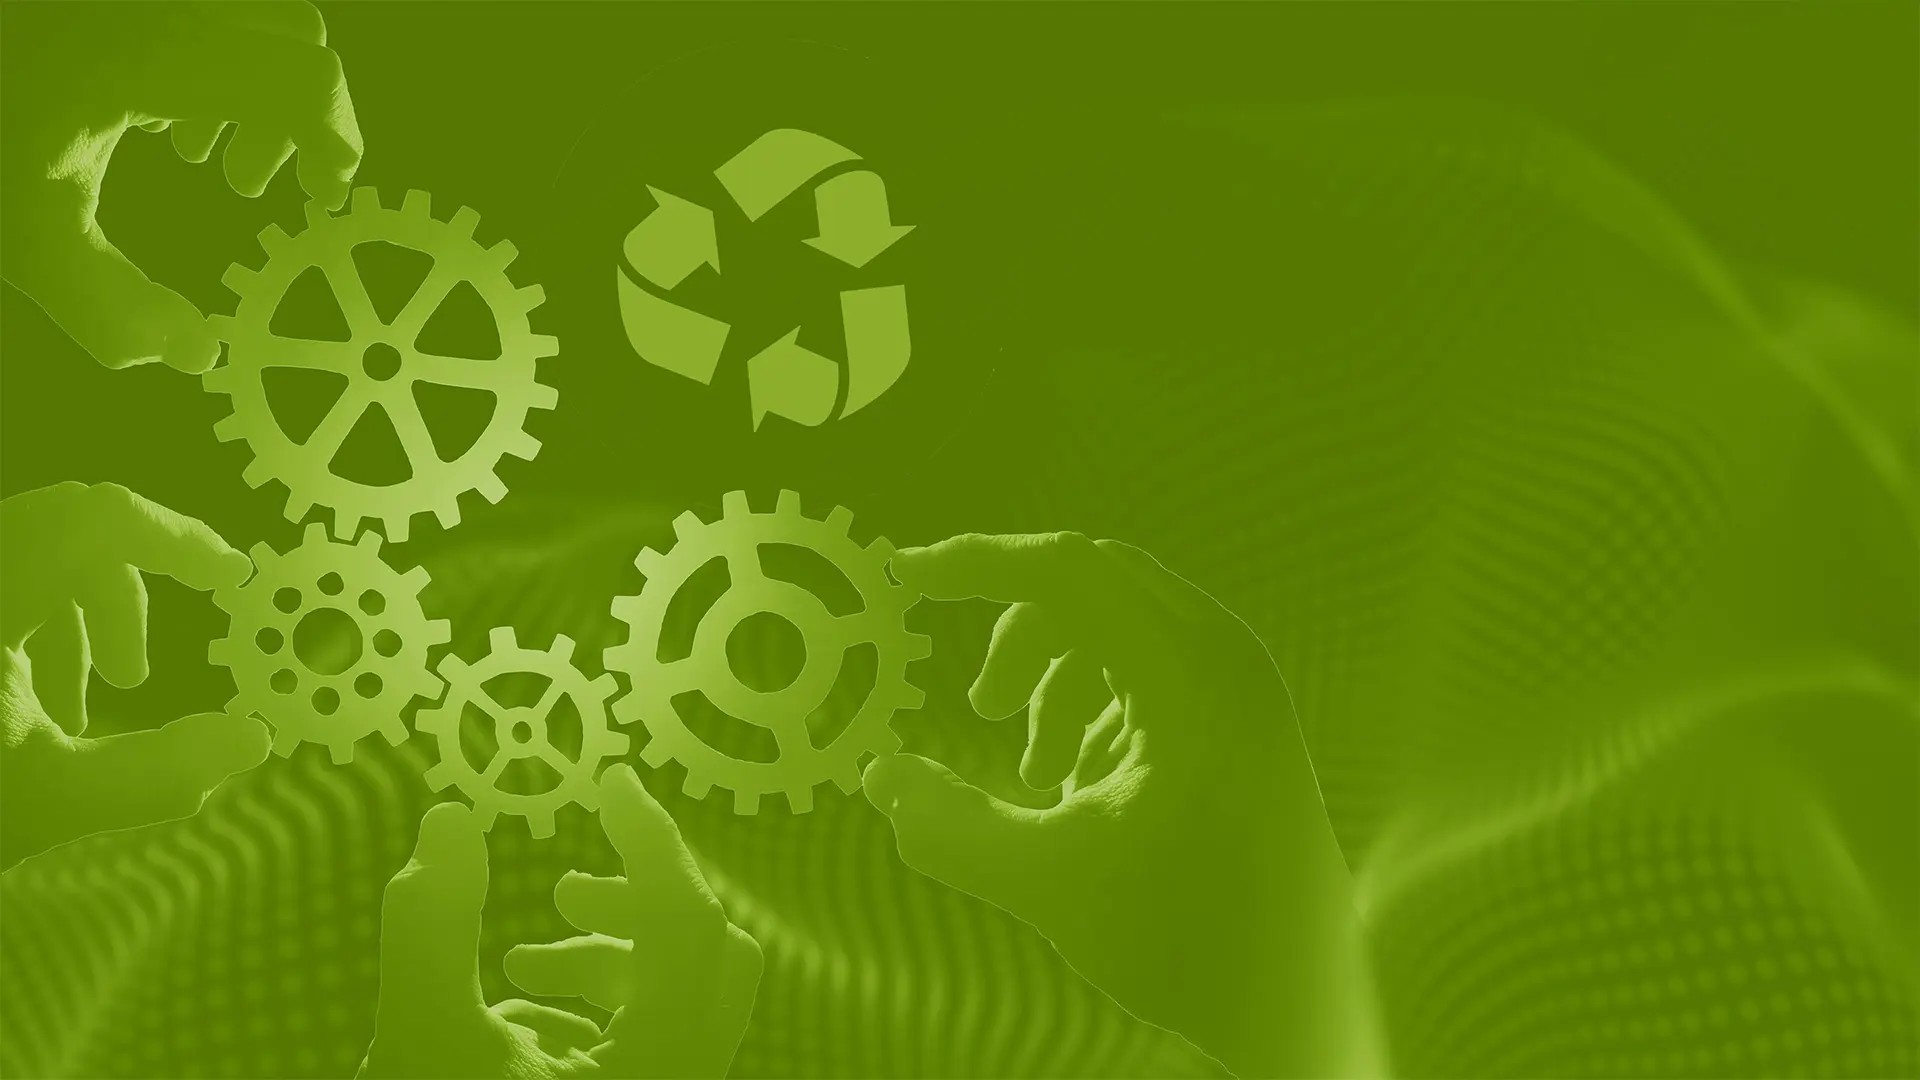 A green illustration with hands holding cogwheels and a recycling symbol